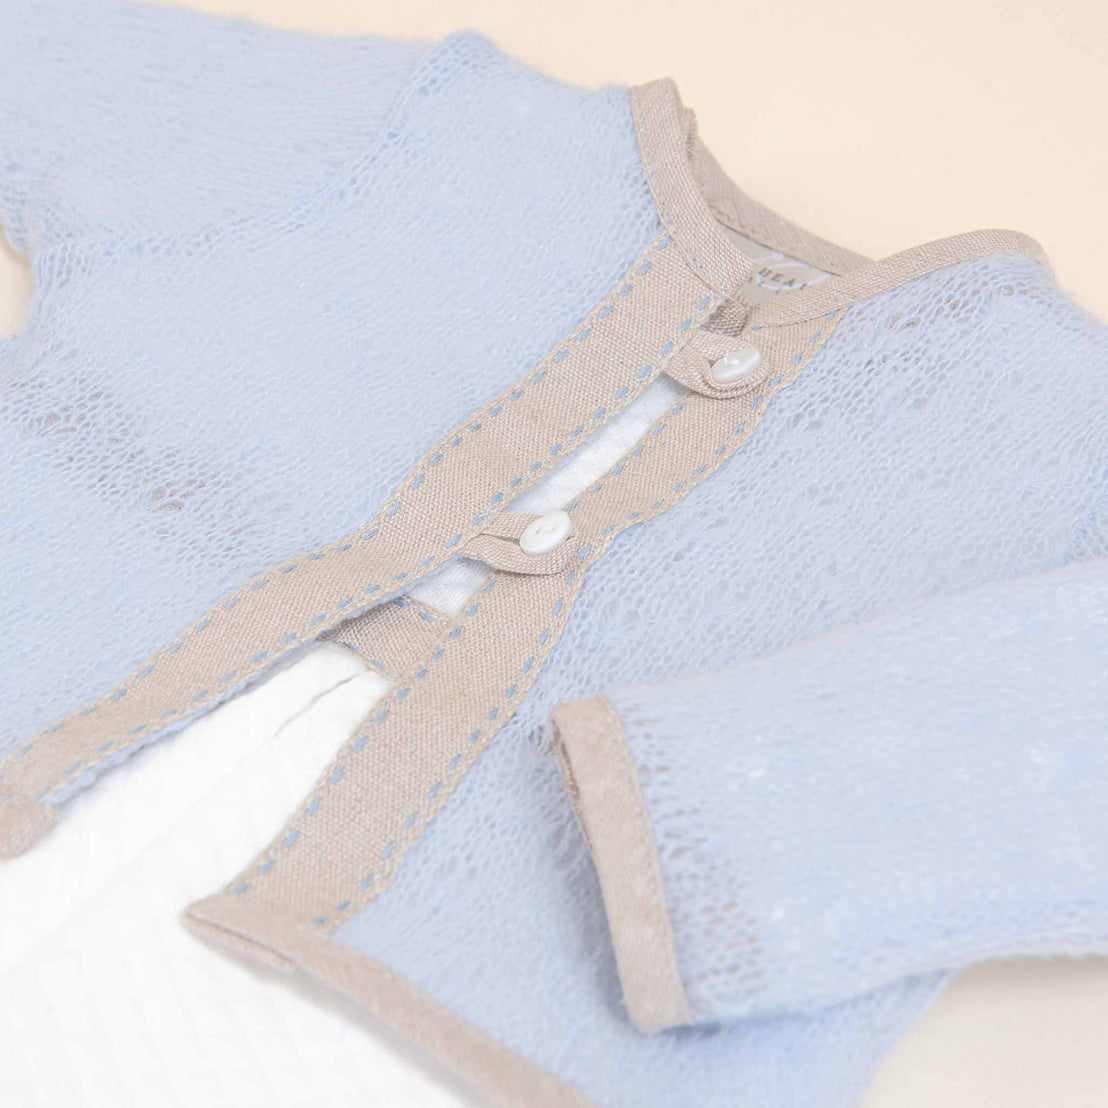 A close-up image of a light blue, knitted Austin Sweater with delicate button details and a soft beige trim, displayed on a plain background.